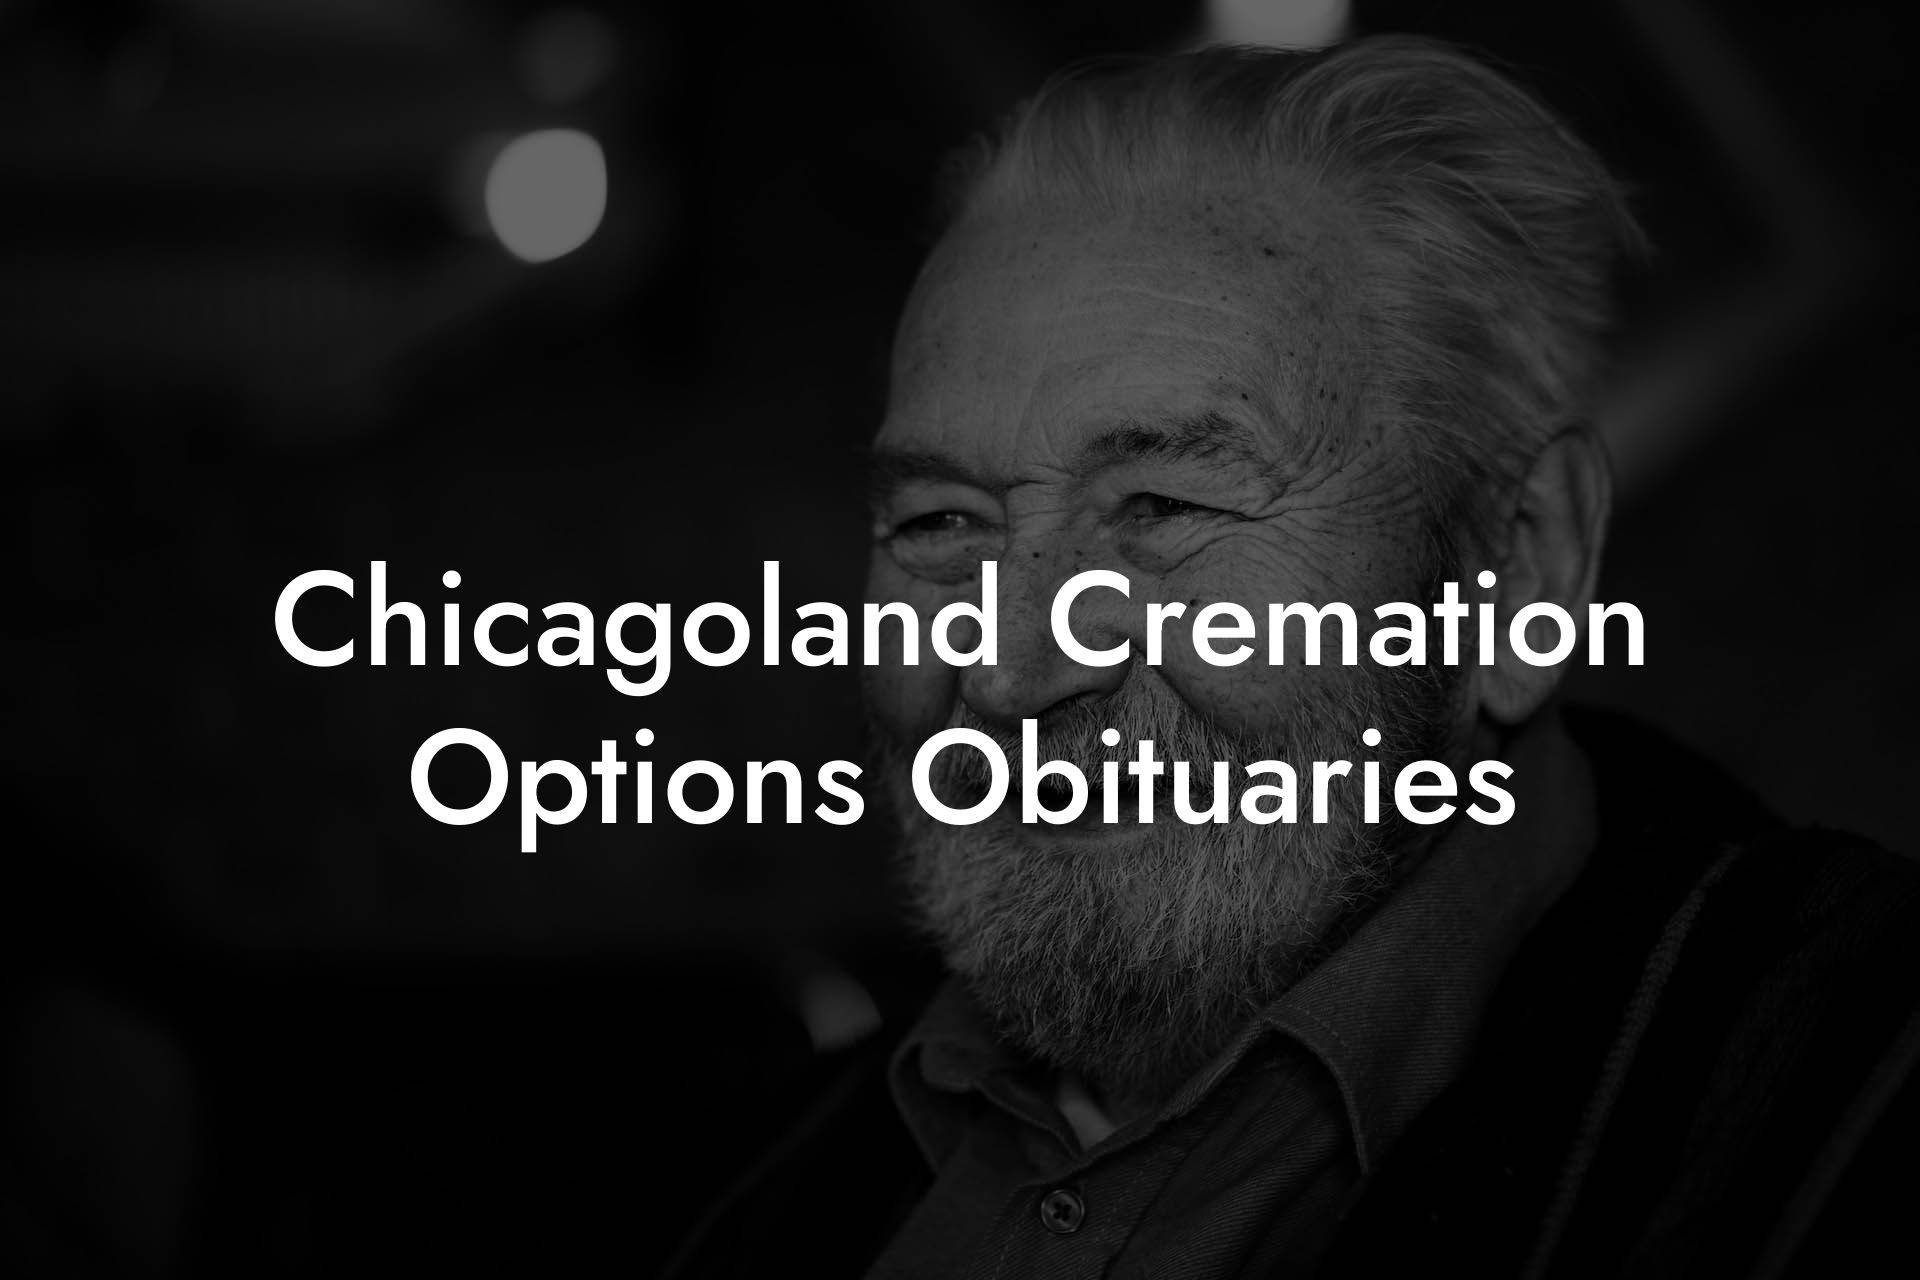 Chicagoland Cremation Options Obituaries